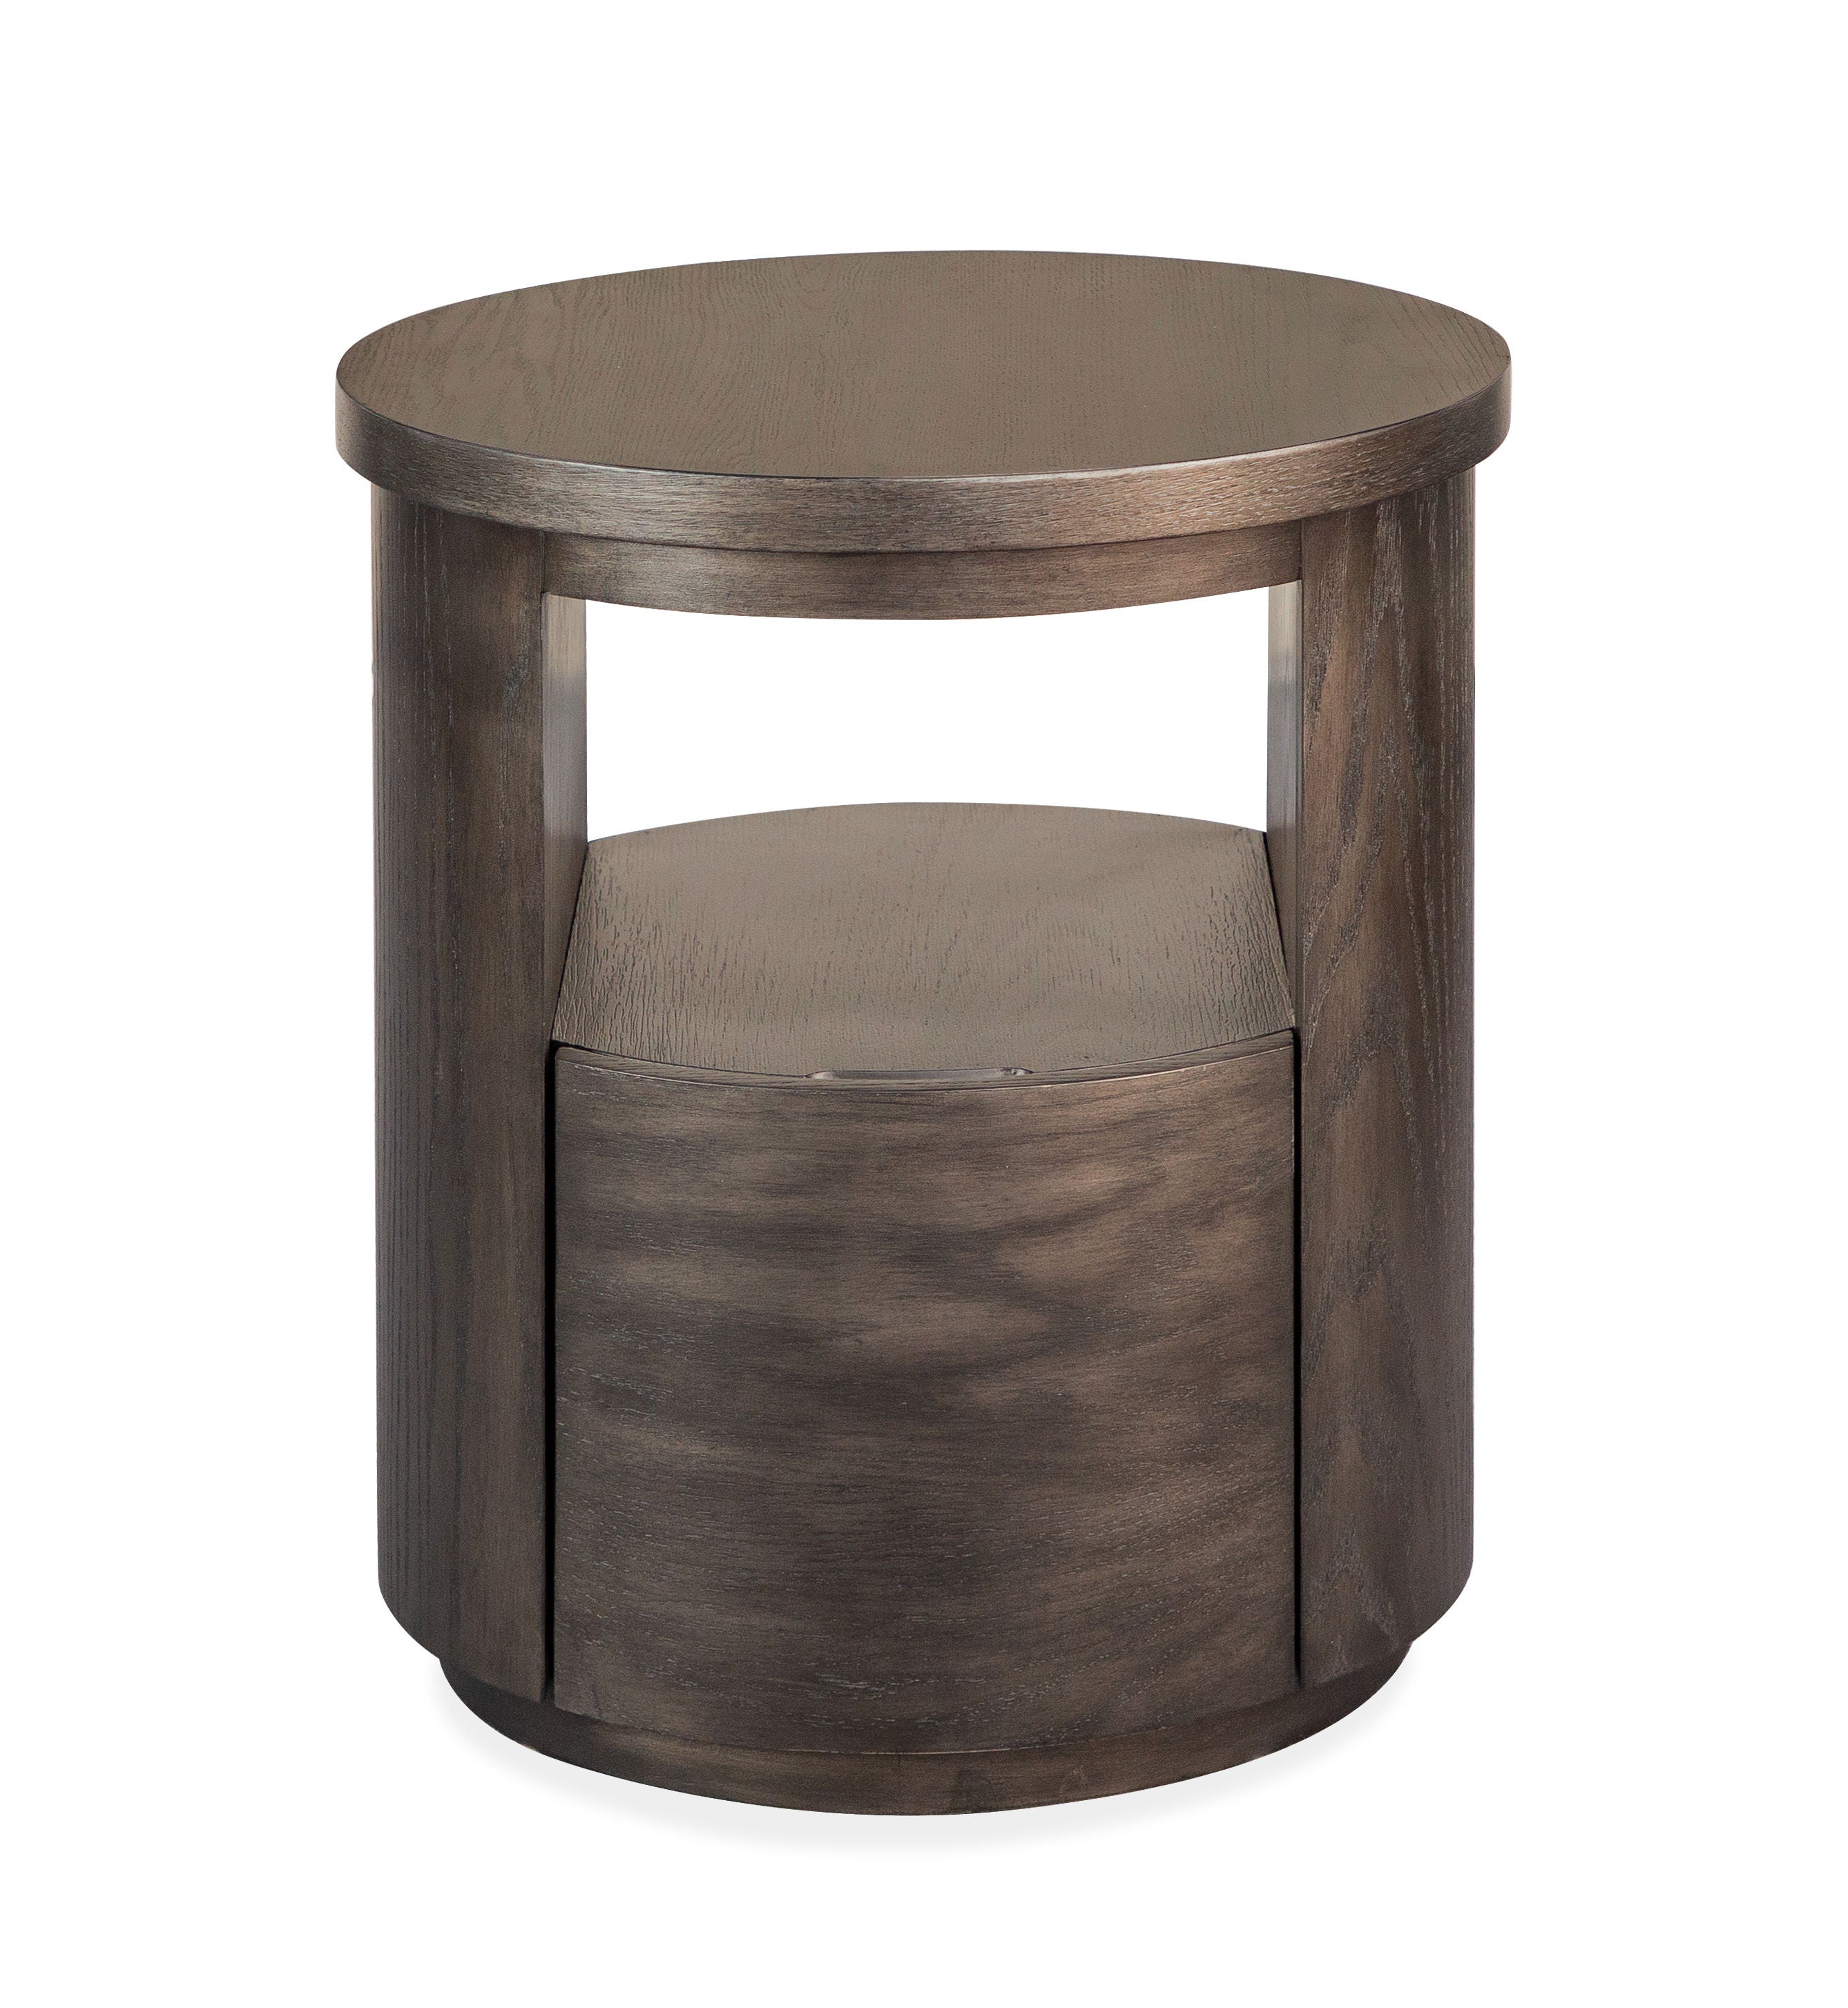 Bosley - Round End Table - Coffee Bean